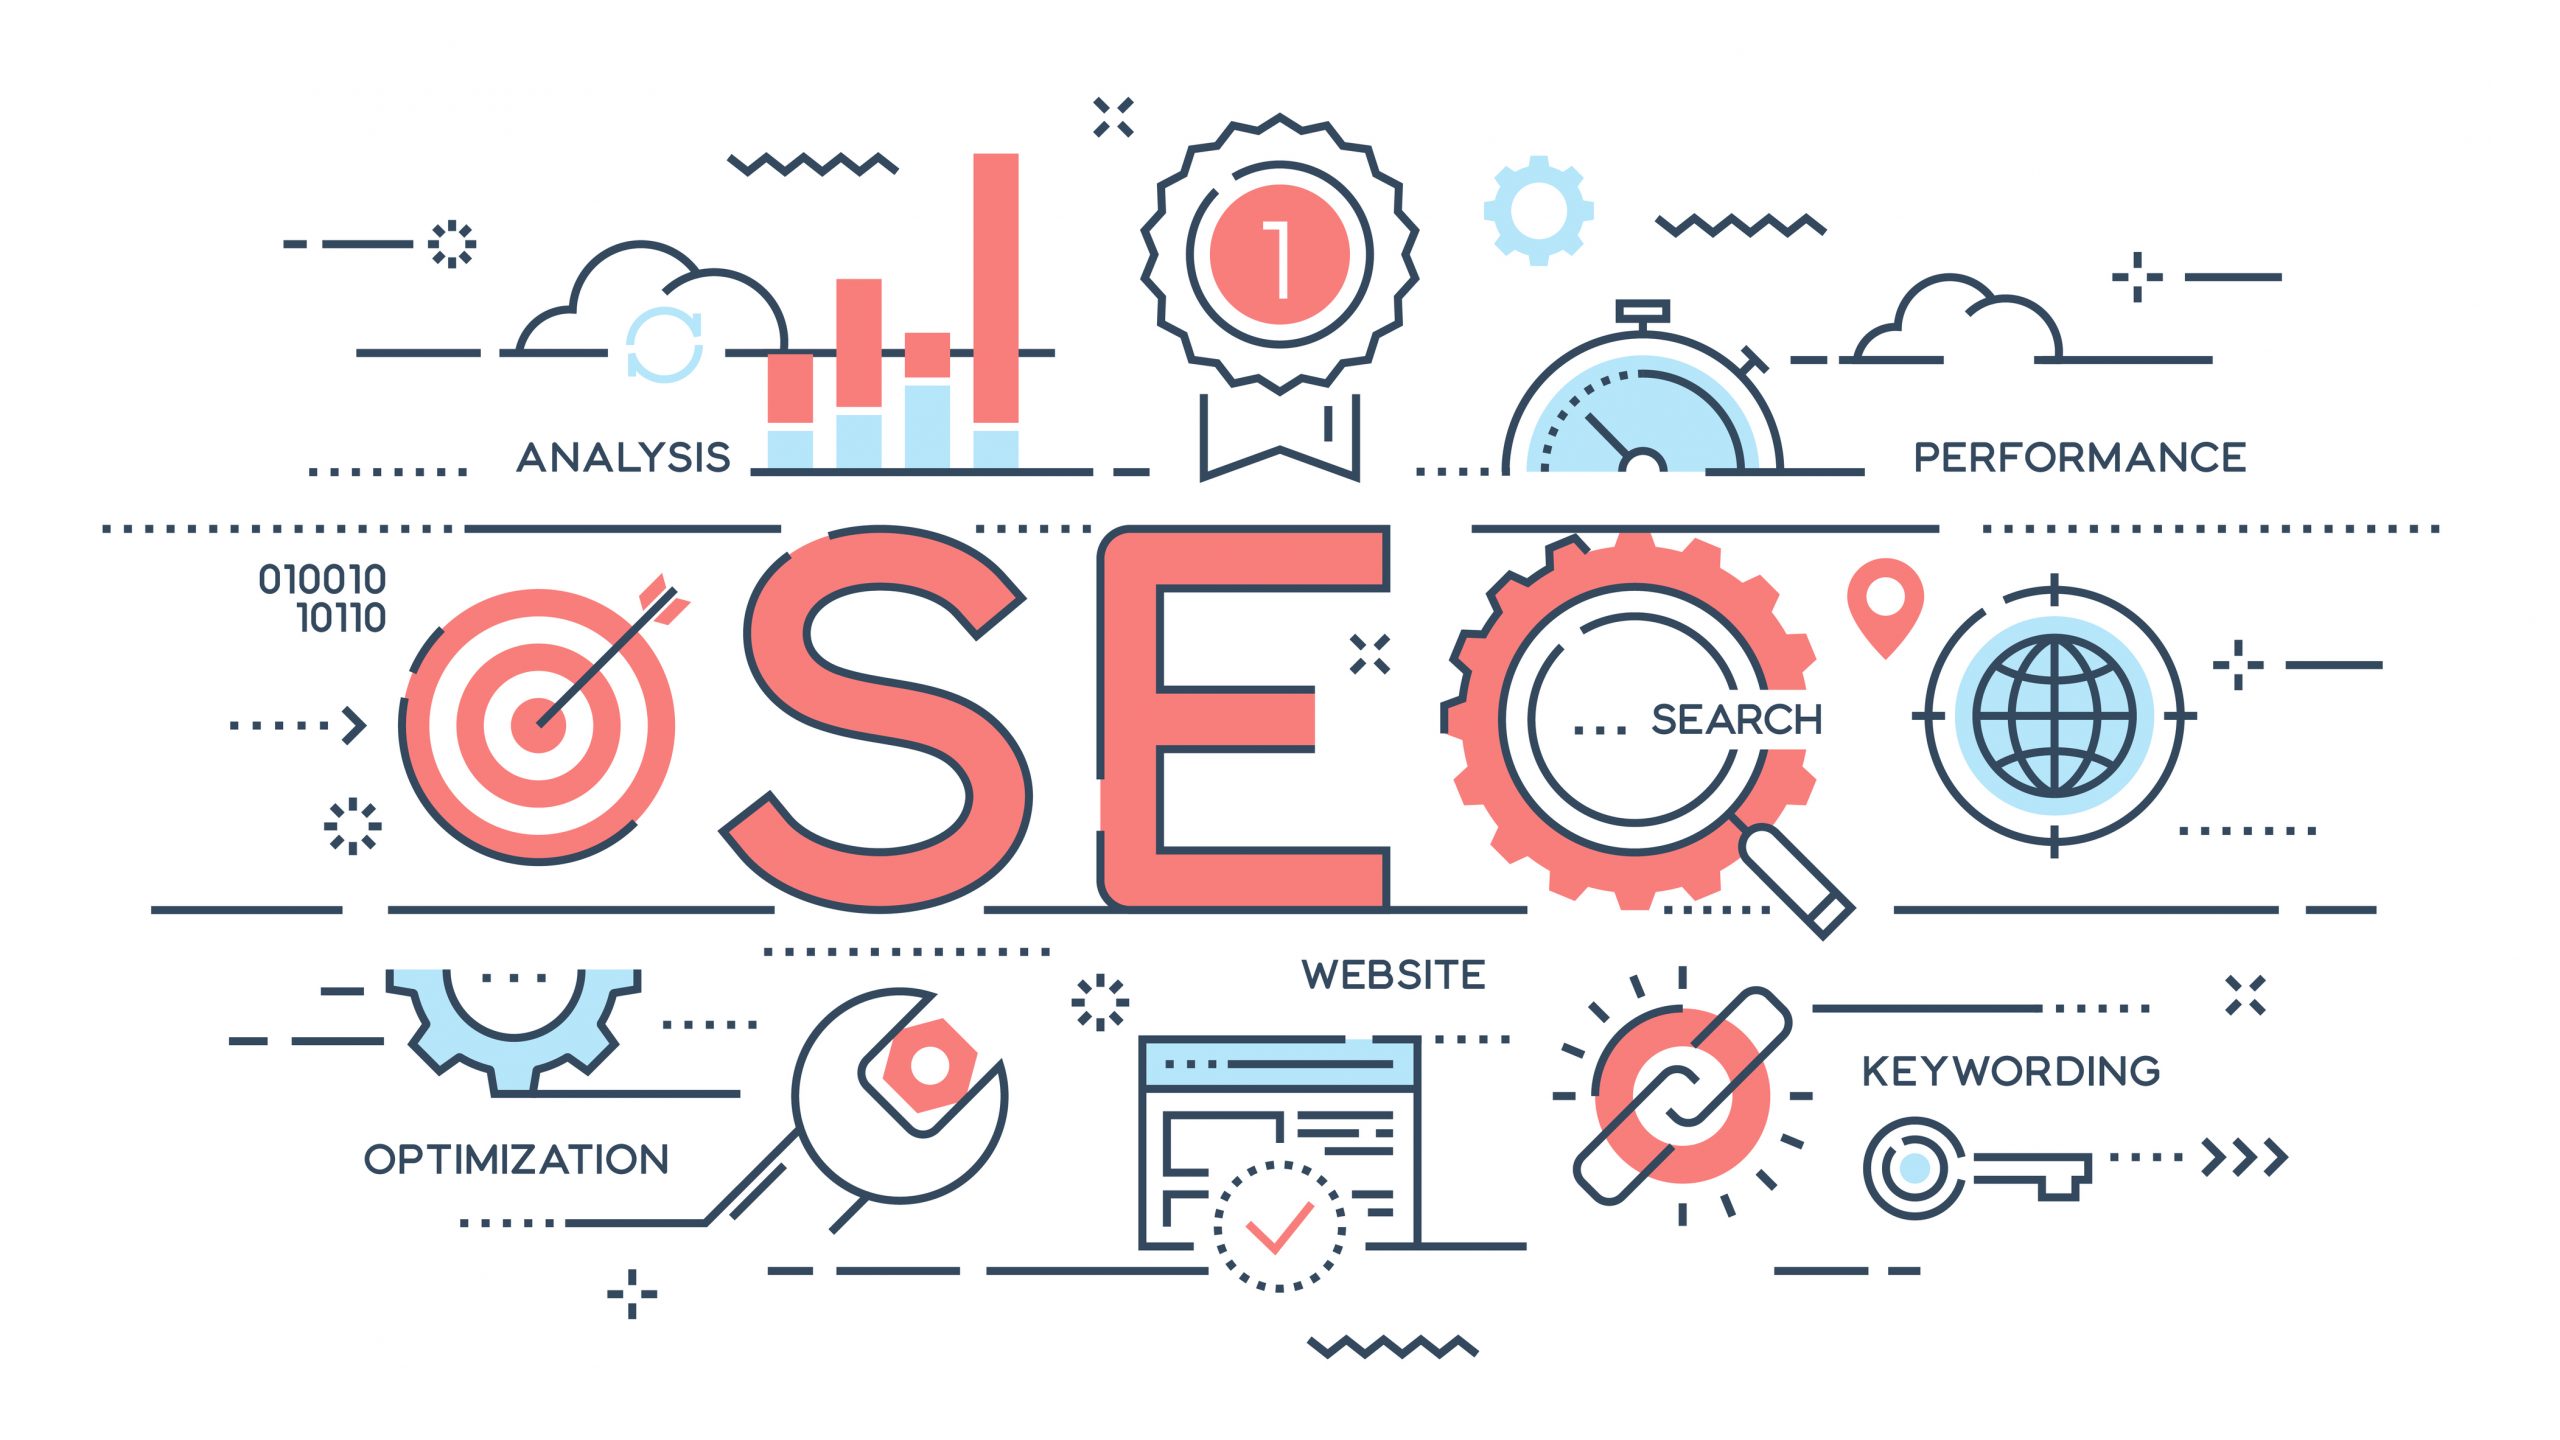 Make Sure Your SEO Goals Are Realistic